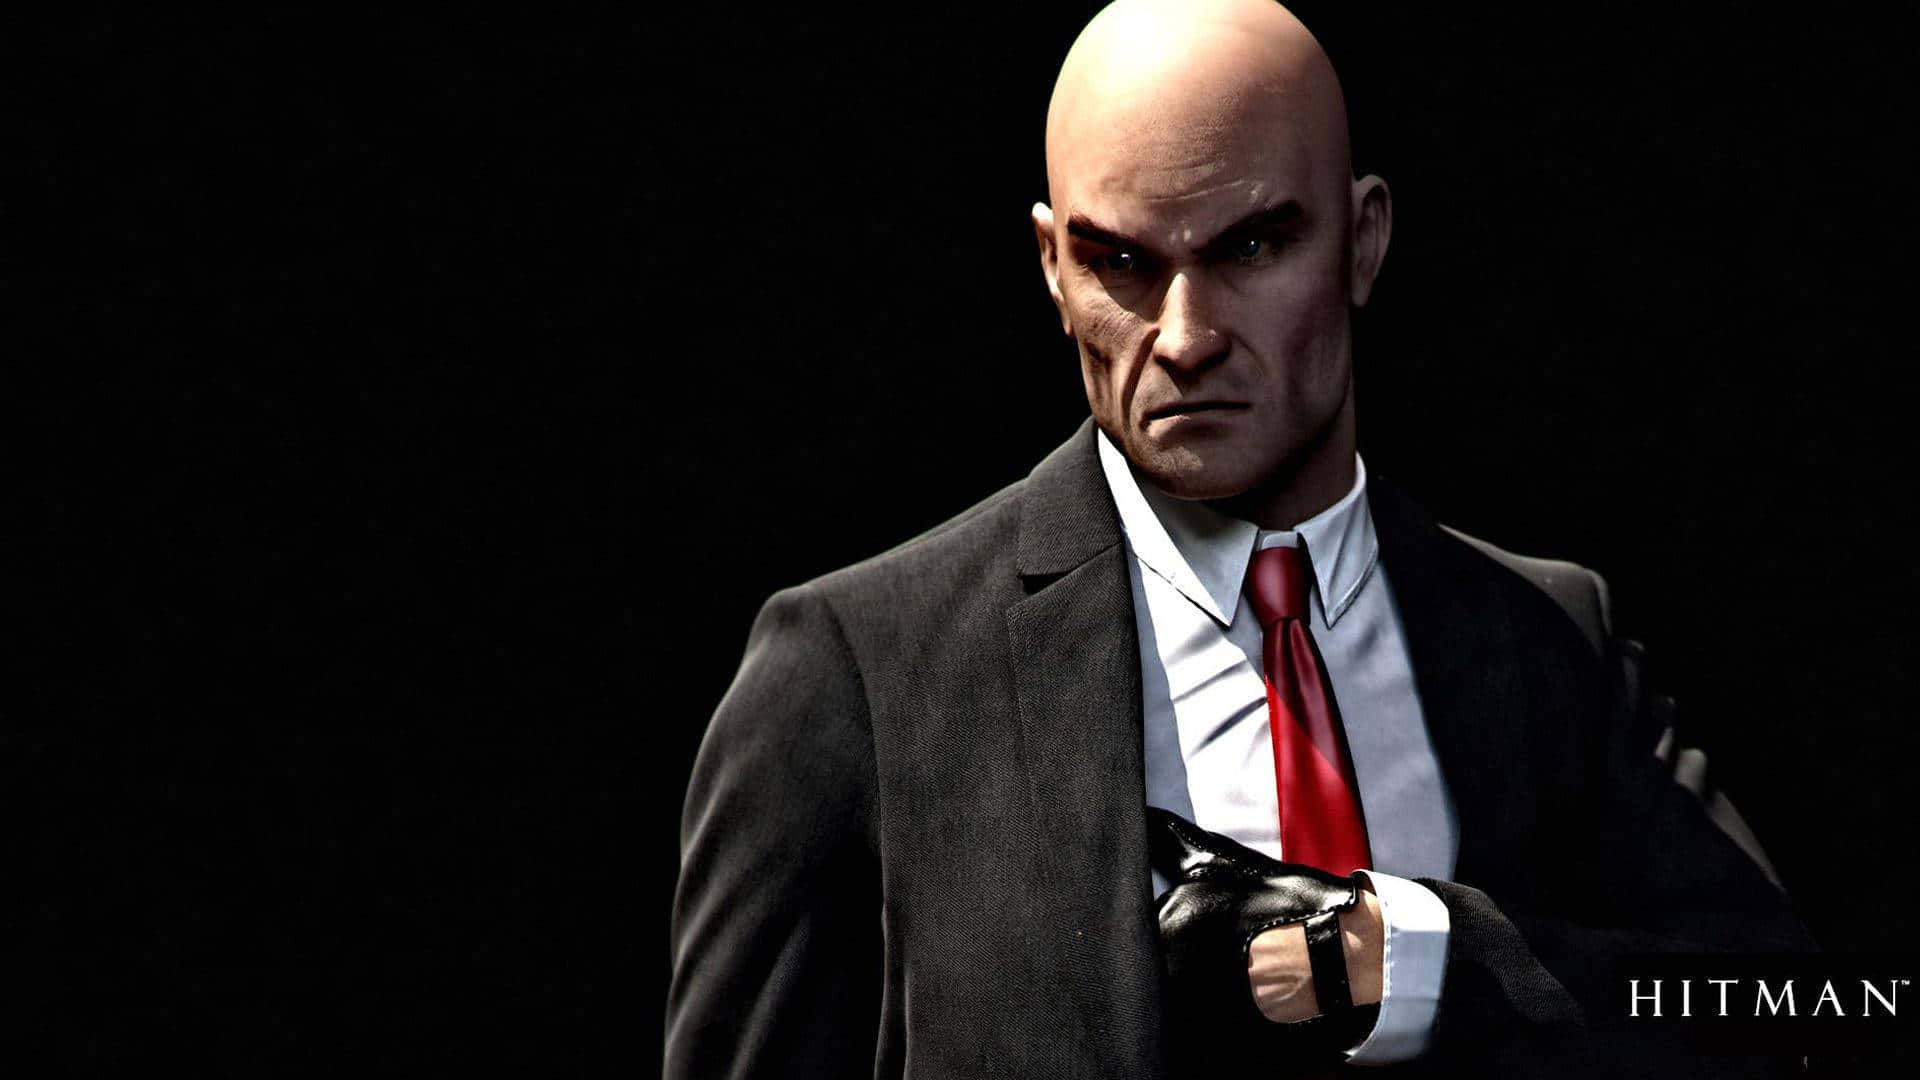 Become the ultimate assassin with Hitman Absolution